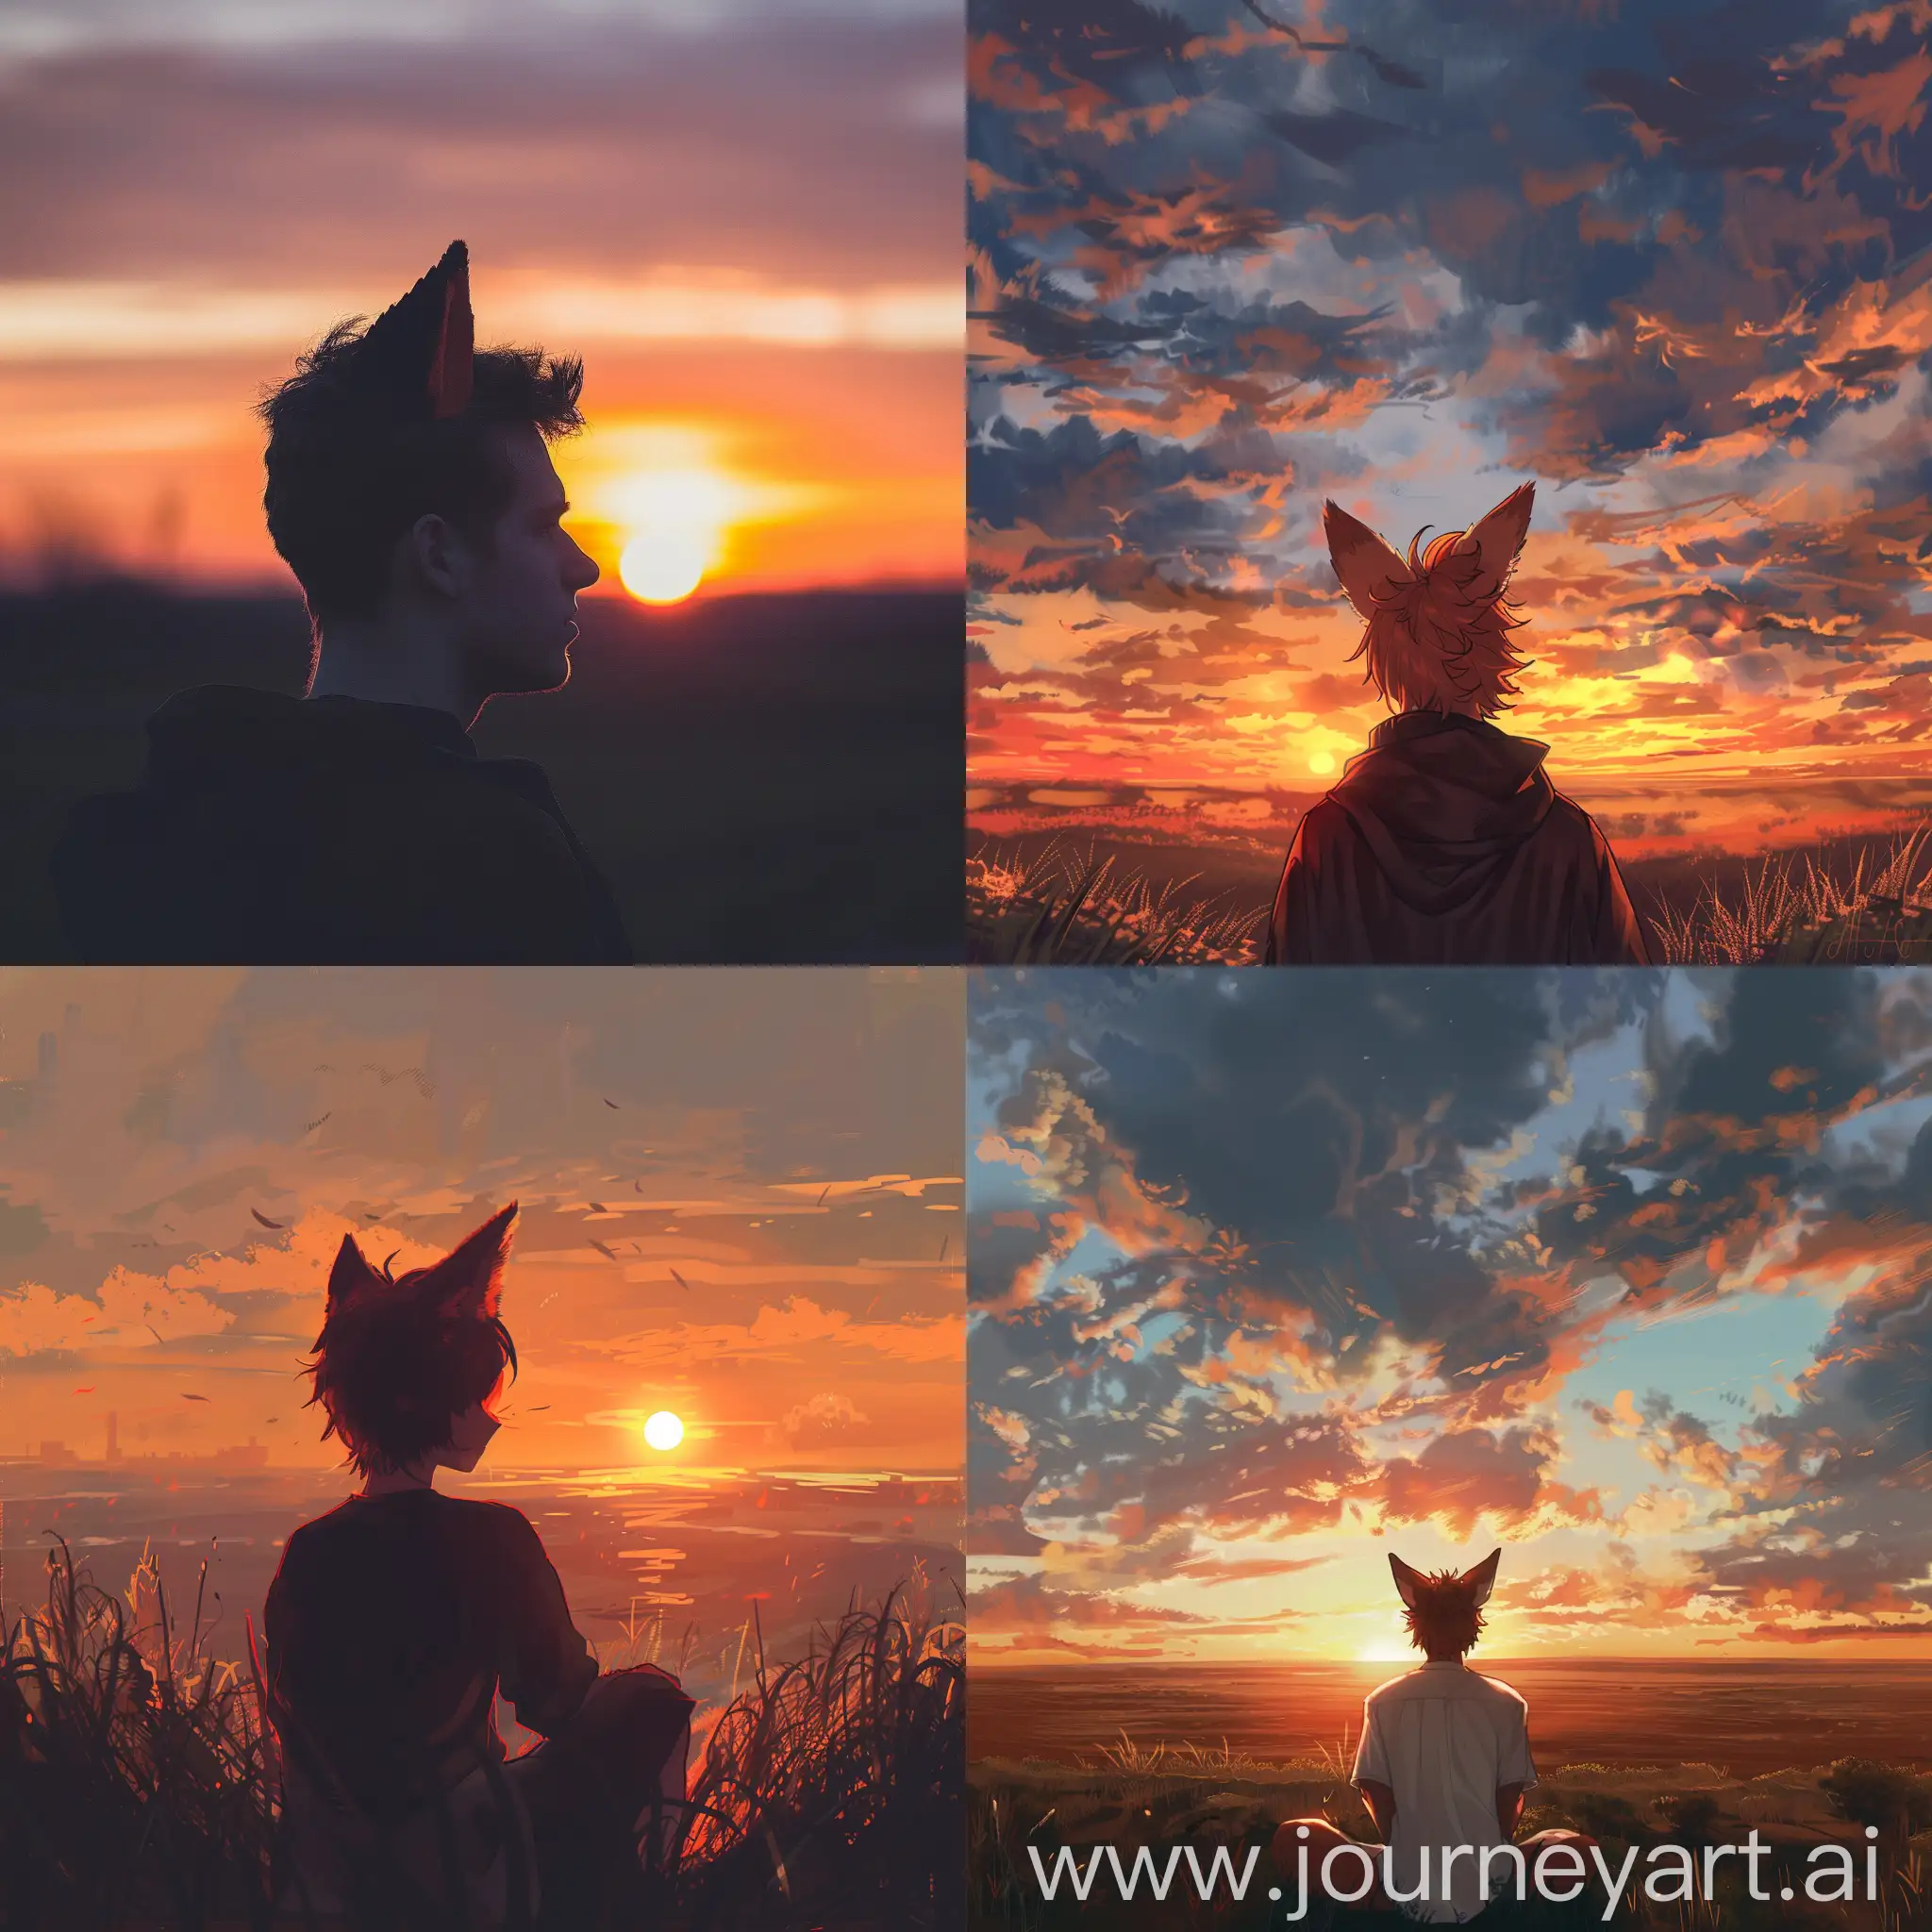 A guy with fox ears admires the sunset